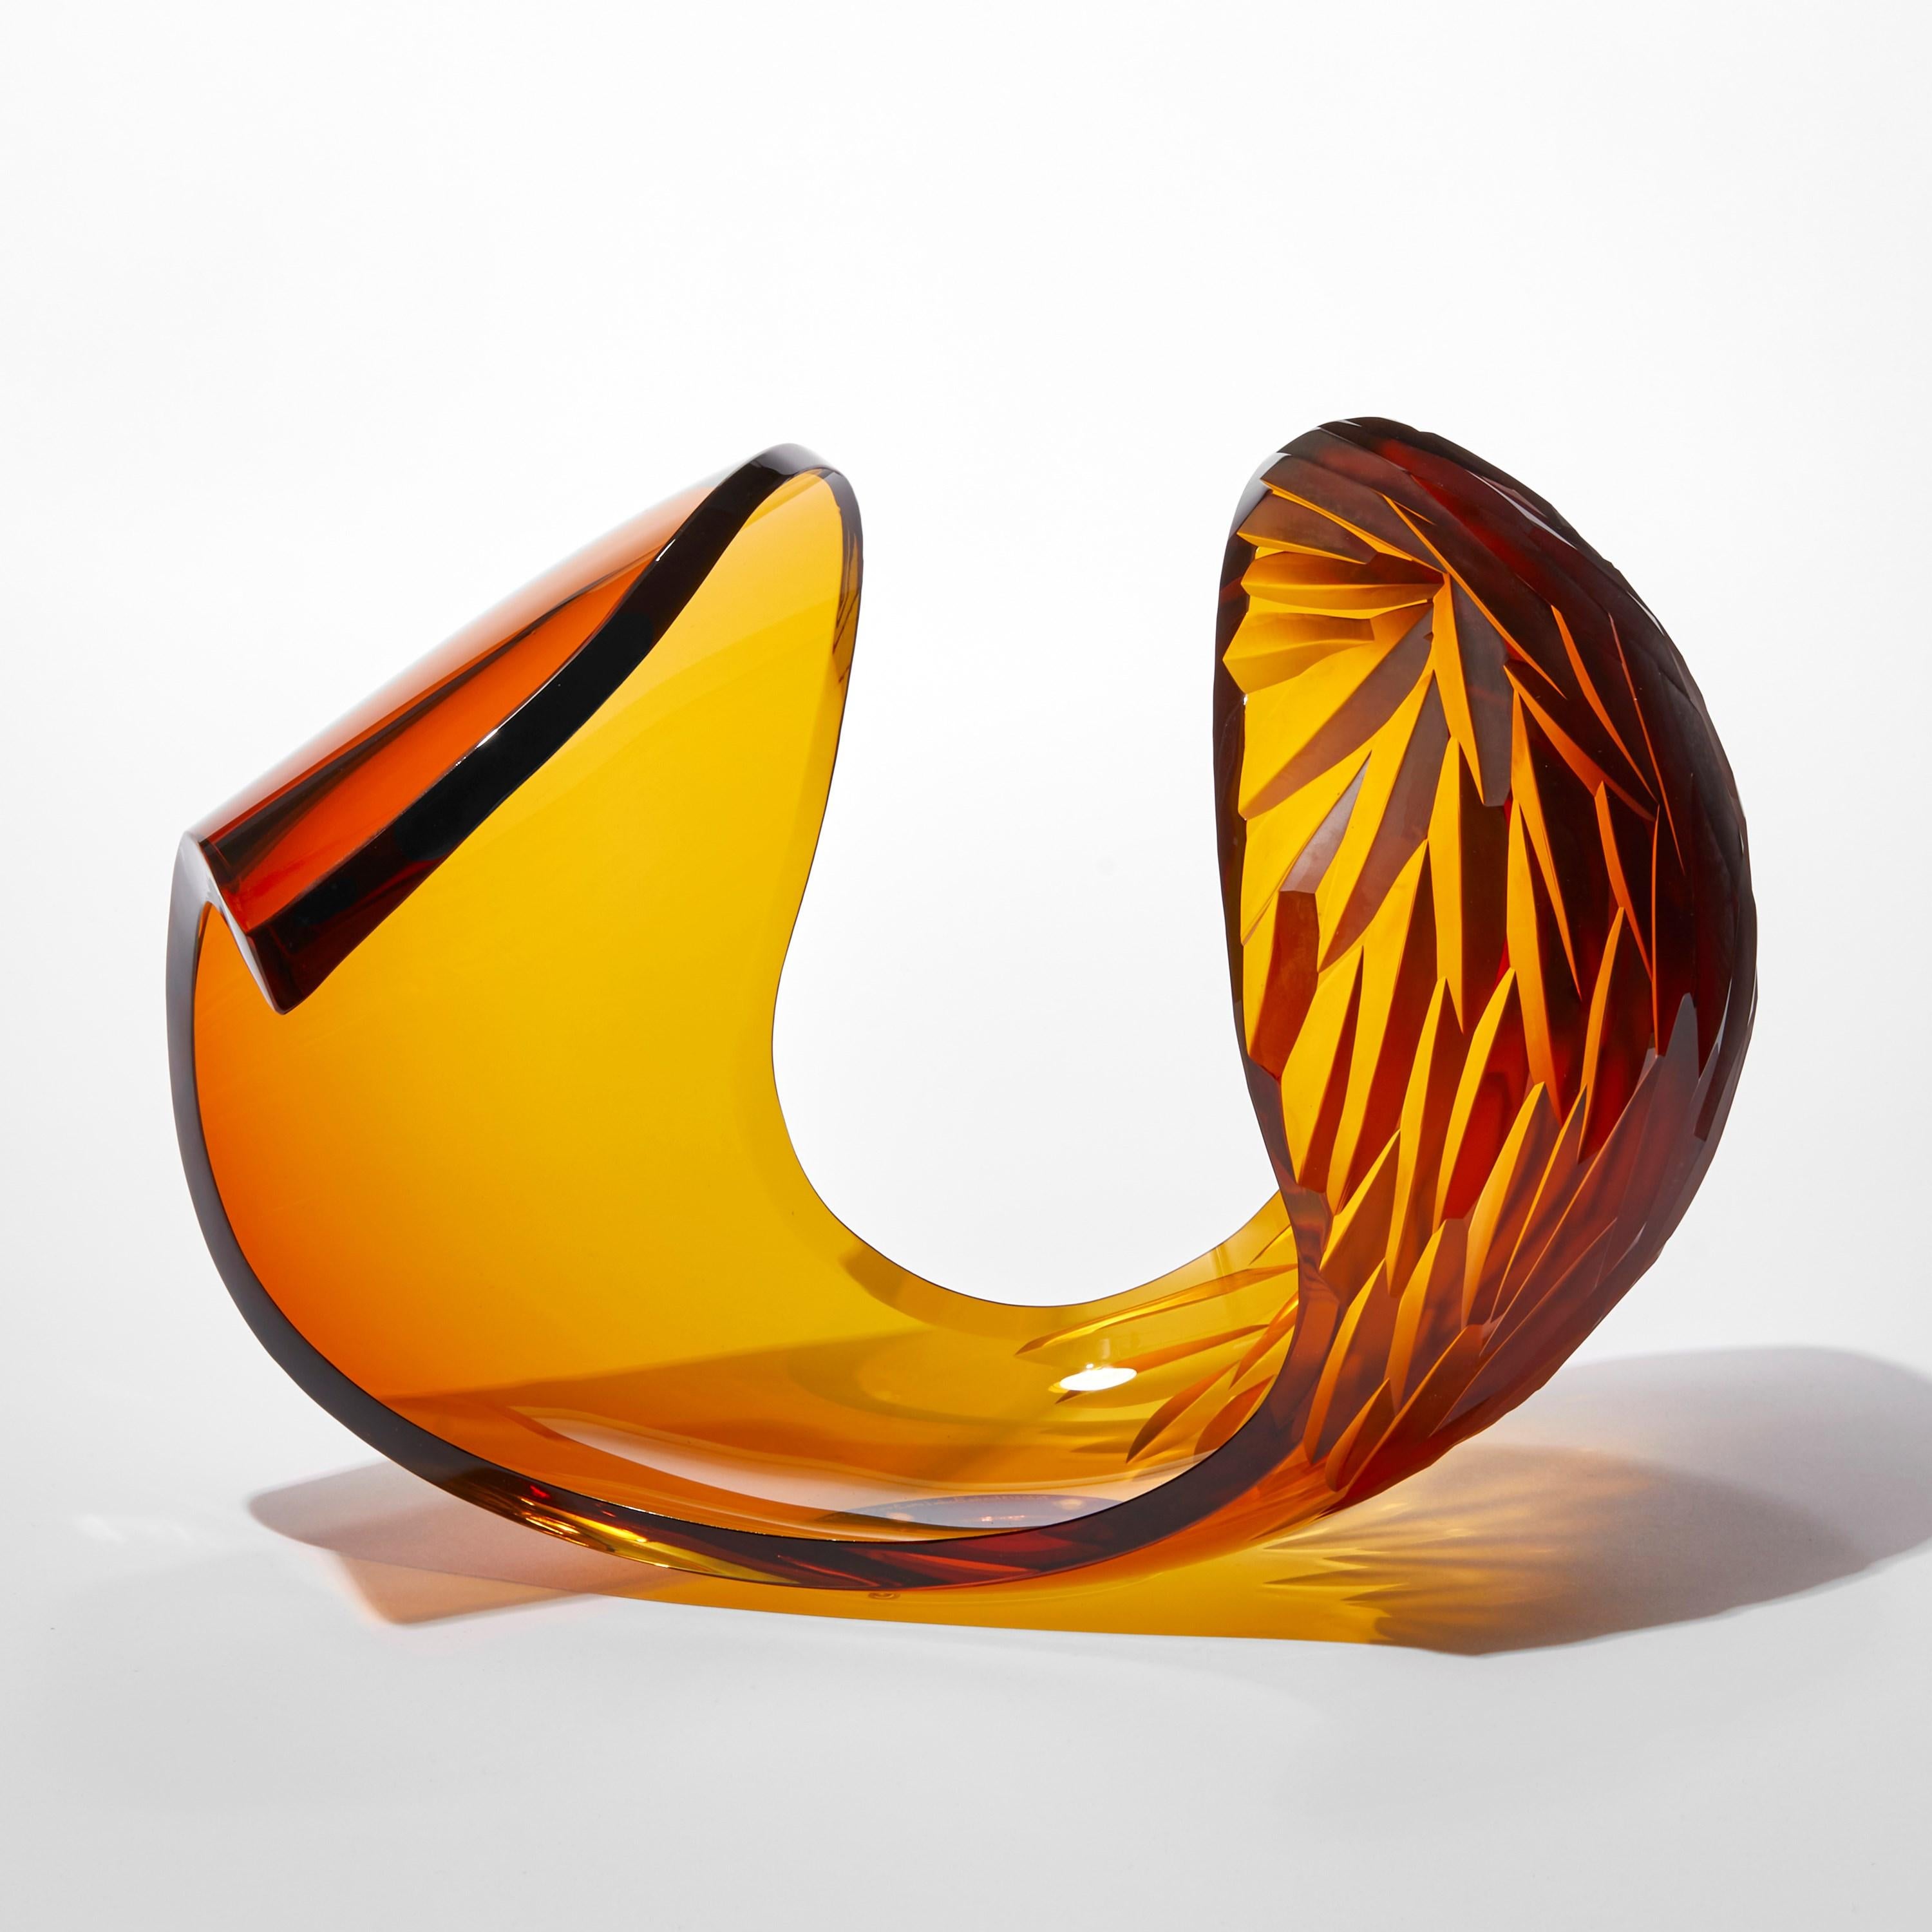 Swedish Planet in Magma, rich amber abstract handblown & cut sculpture by Lena Bergström